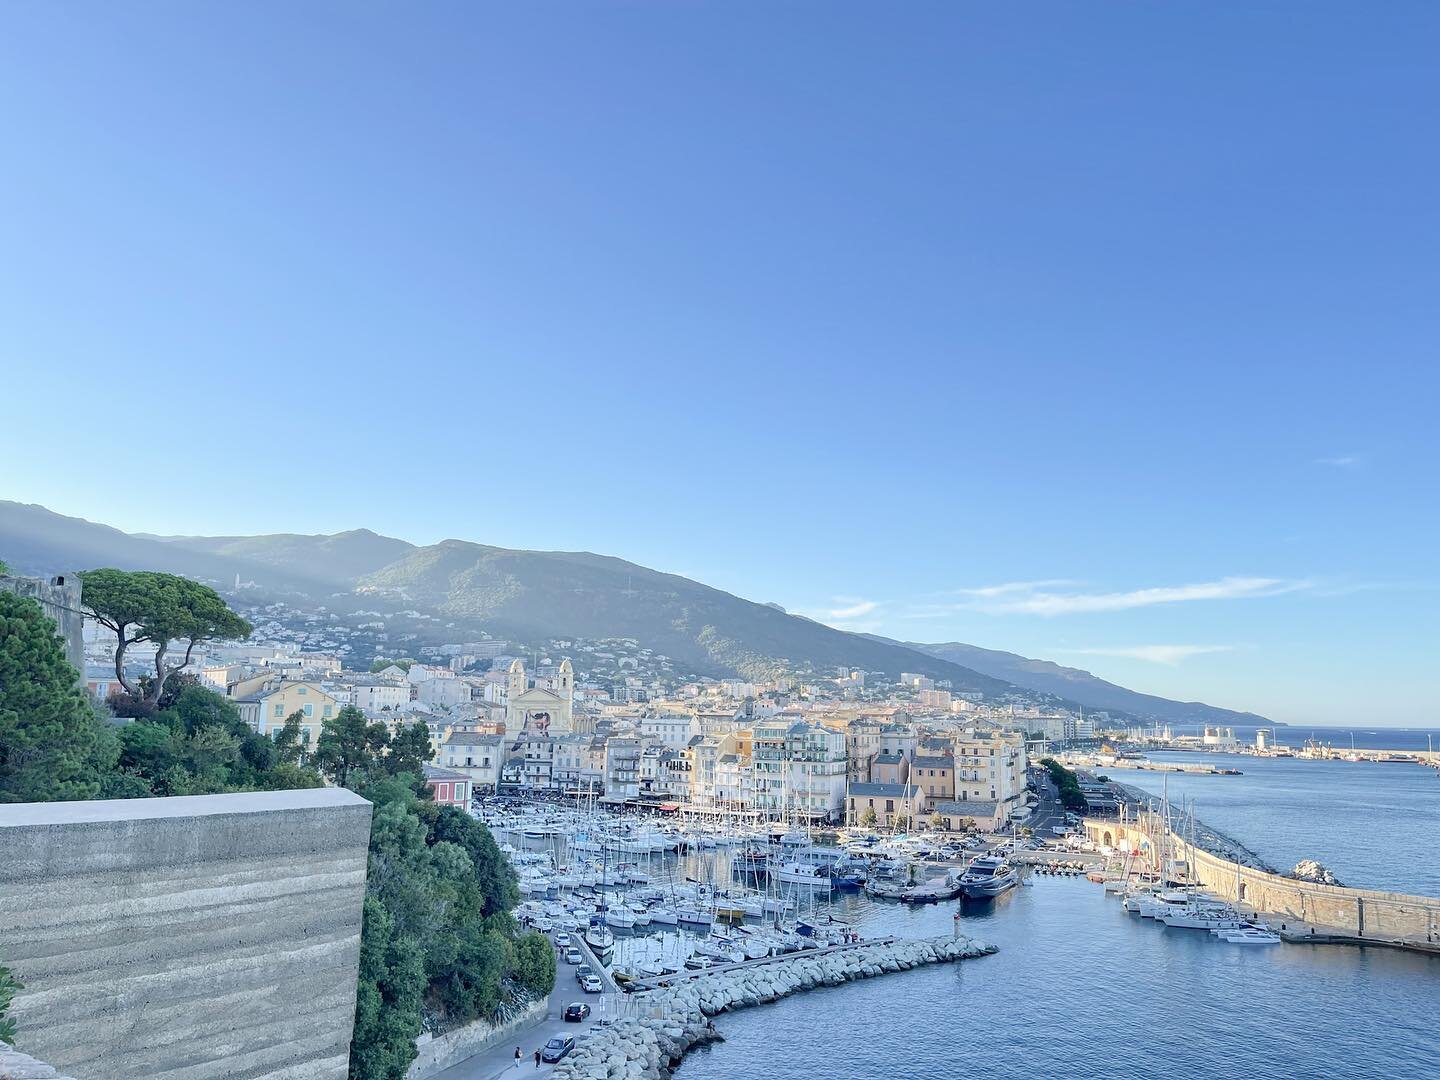 Bastia, Corsica. The most thrilling part of exploration travel is entering cities with open hearts. We planned only one night stay in Bastia as we were arriving later in the evening. With minimal anticipation of what this city offered imagine our sur